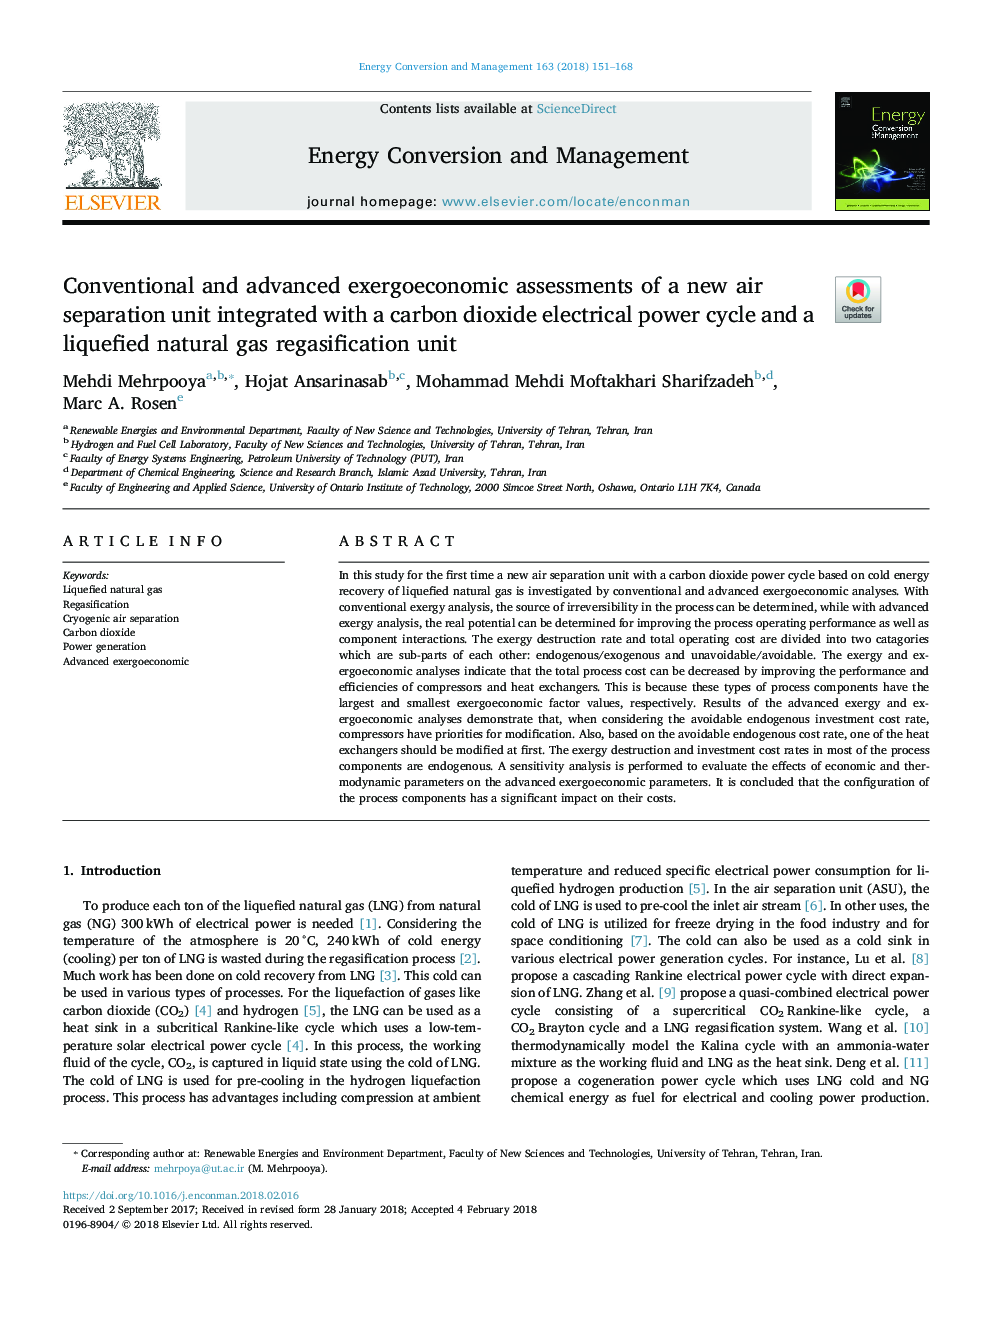 Conventional and advanced exergoeconomic assessments of a new air separation unit integrated with a carbon dioxide electrical power cycle and a liquefied natural gas regasification unit